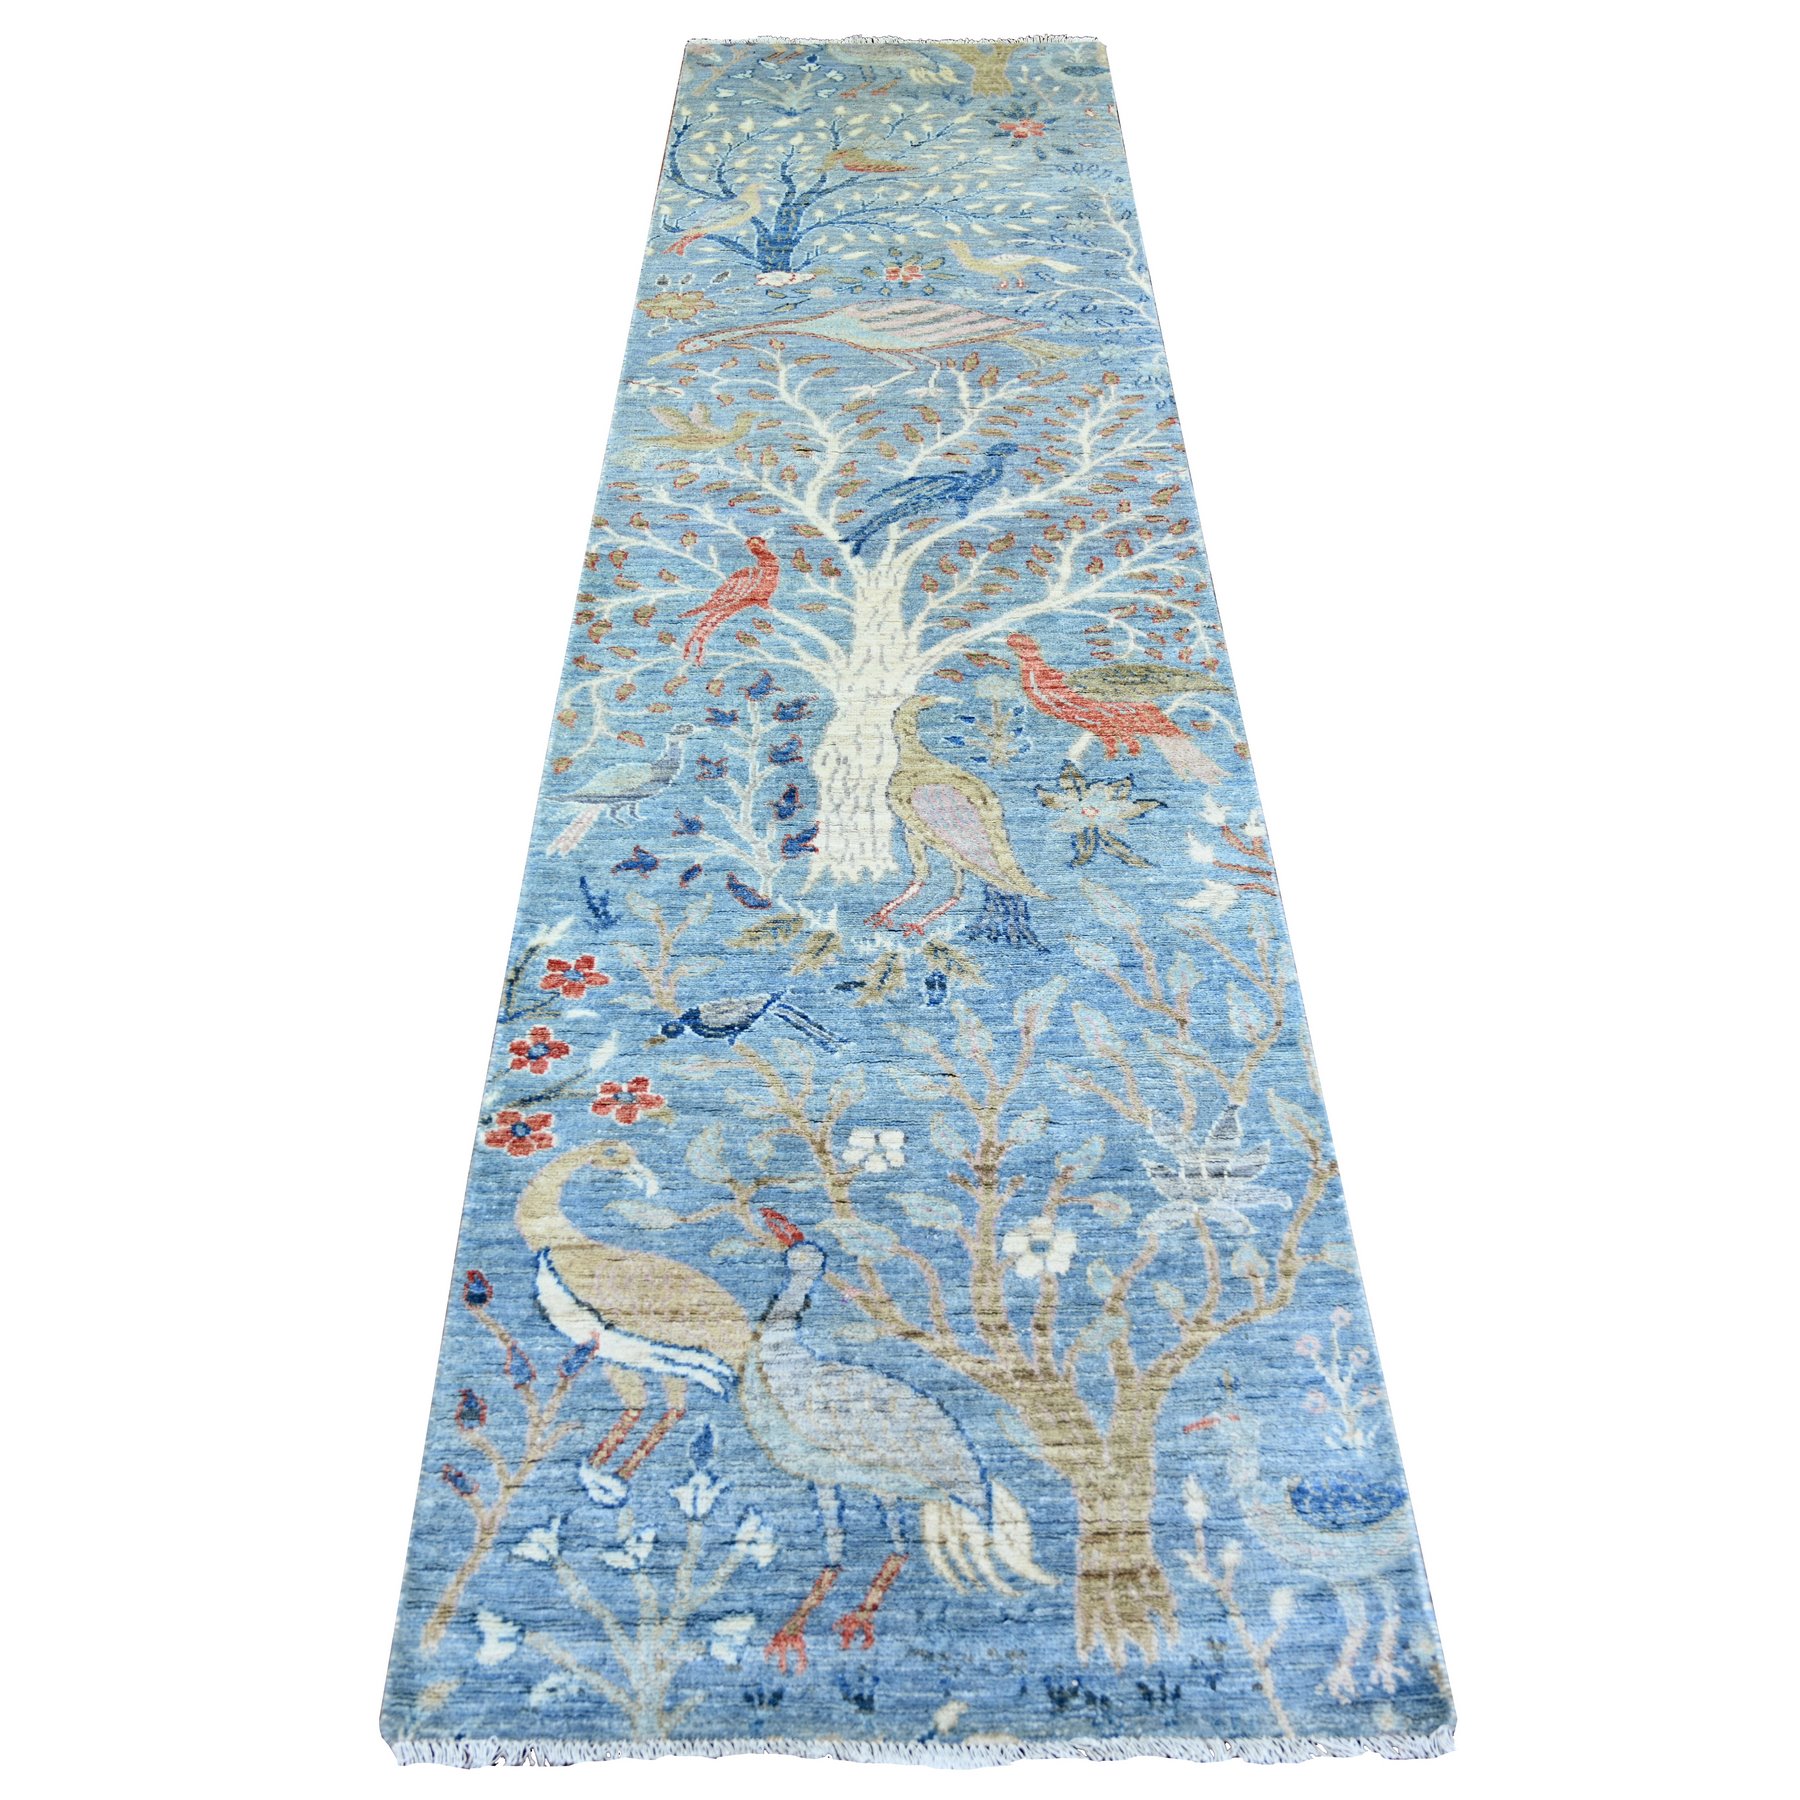 2'7"x10'1" Steel Blue, Afghan Peshawar with Birds Of Paradise Natural Dyes, Pure Wool Hand Woven, Runner Oriental Rug 